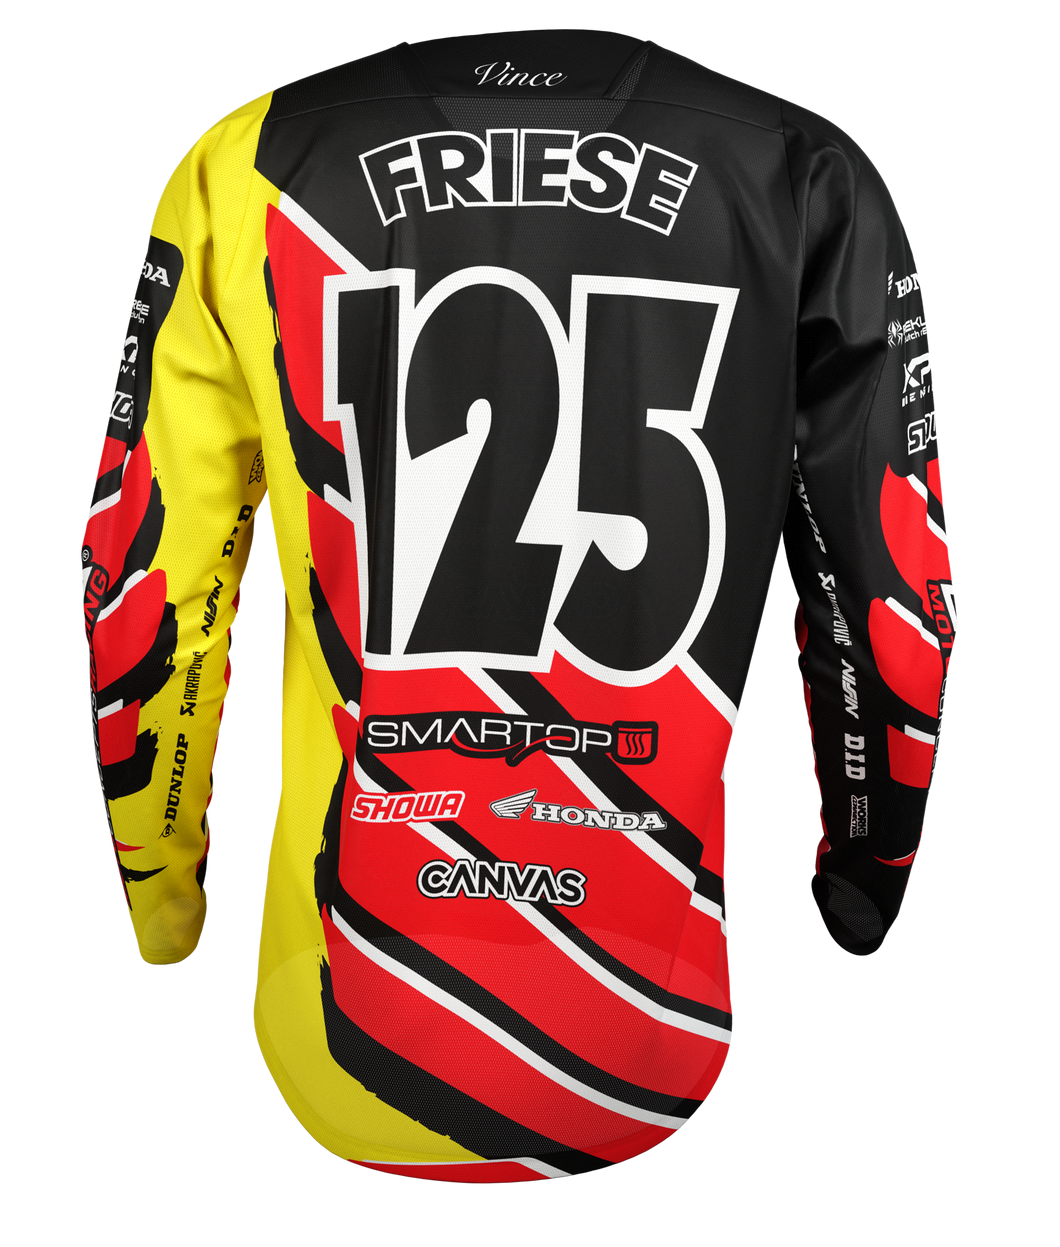 Vince Friese Racer Replica Jersey - San Diego